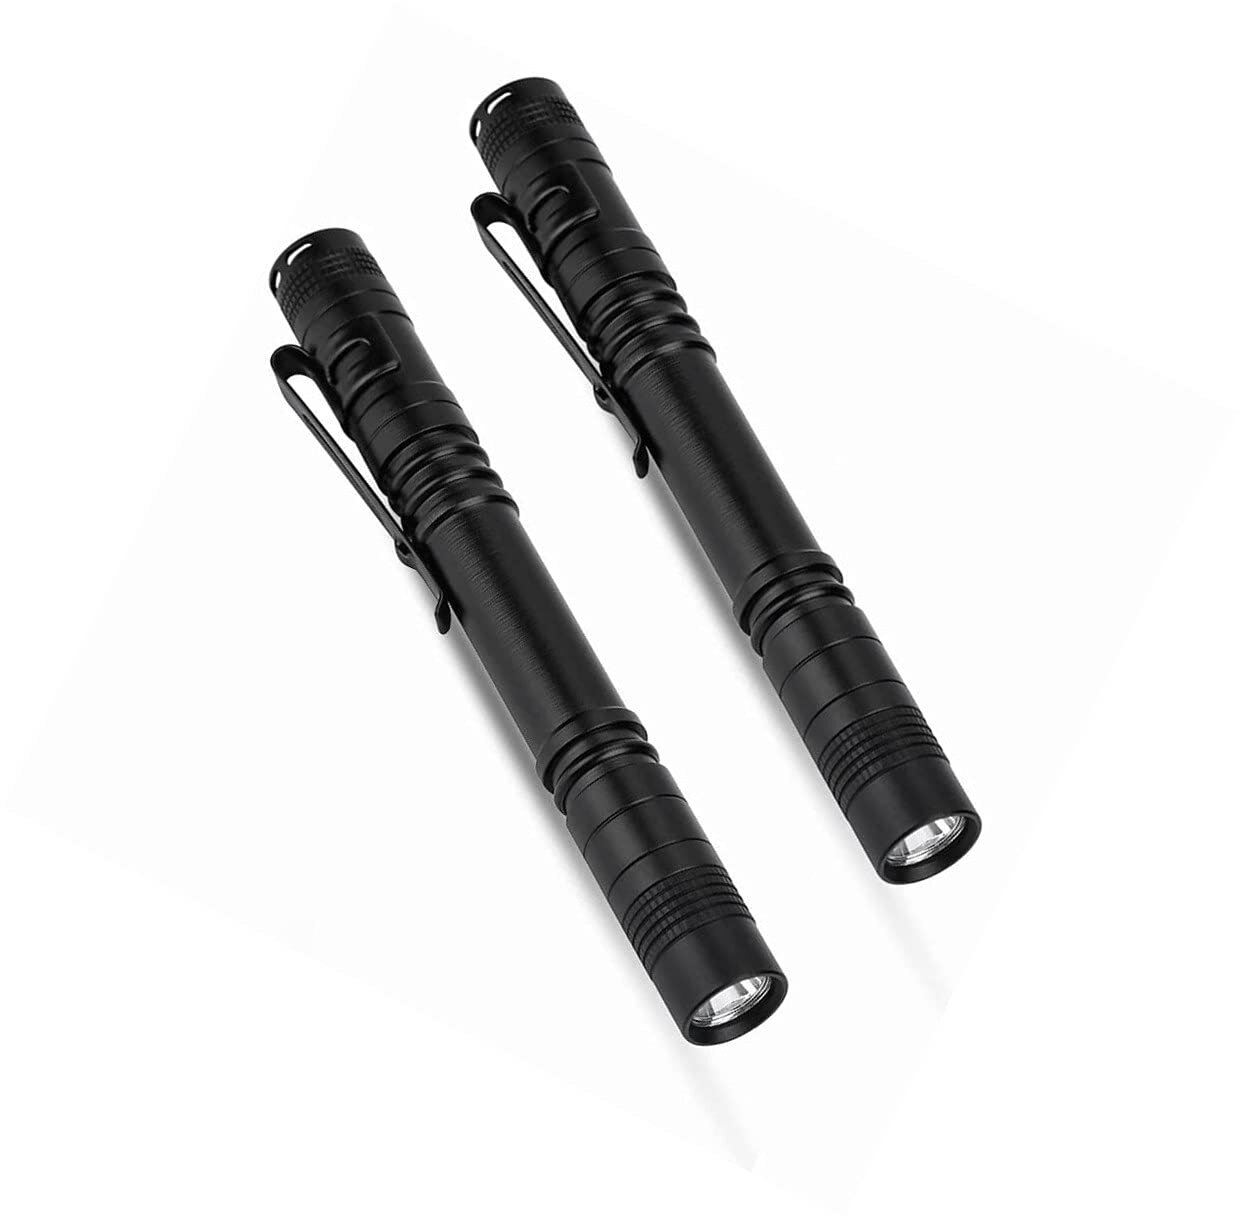 TACTICAL FLASHLIGHT Mini LED Torch Light Pen USB Rechargeable Lamp With Clip NEW 